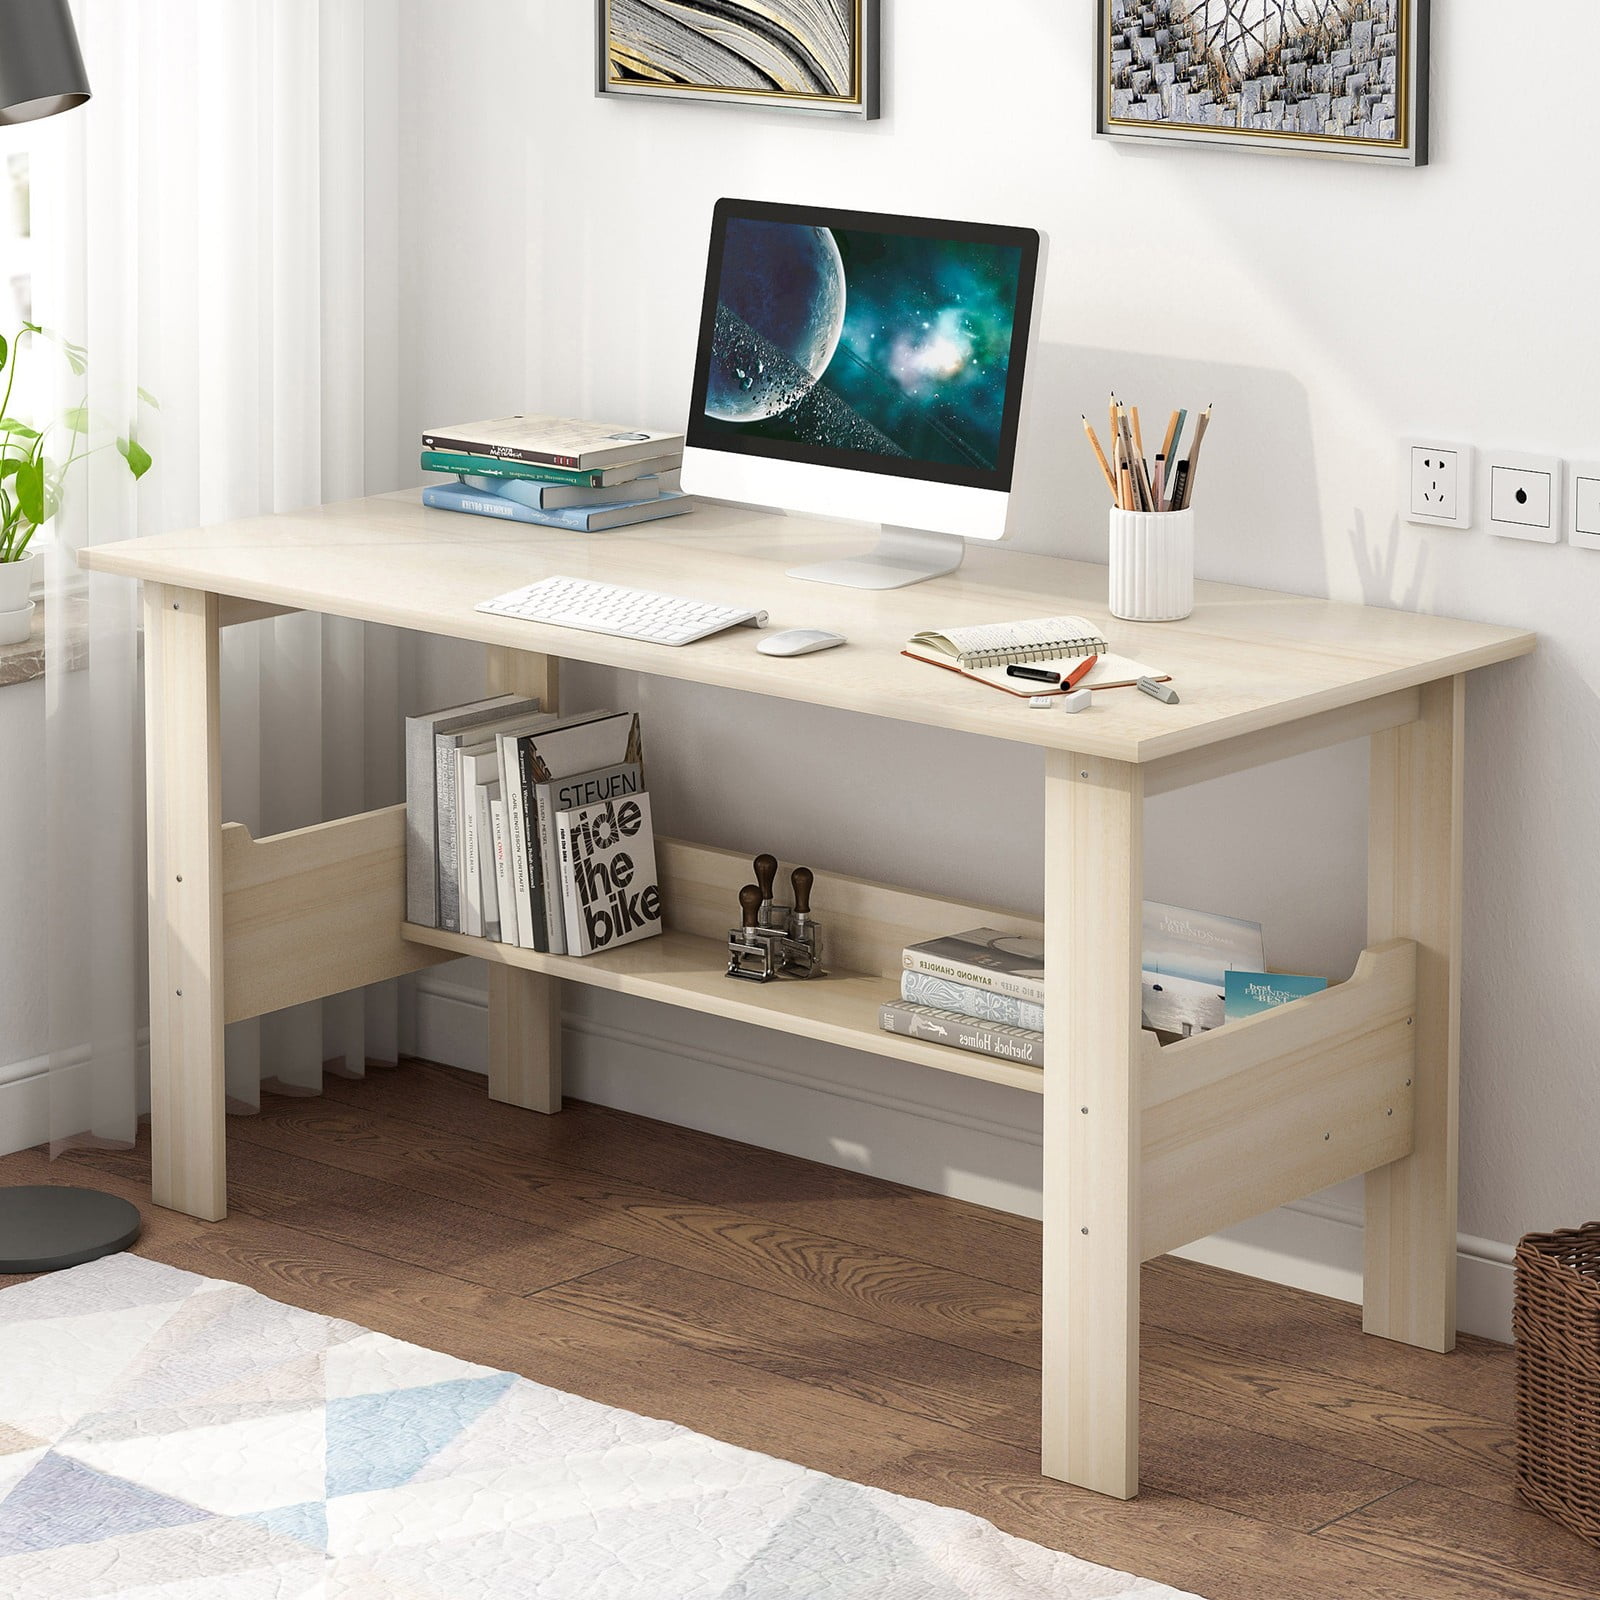 Details about   Computer Desk PC Laptop Table Study Workstation Wood Home Office Furnitures US 